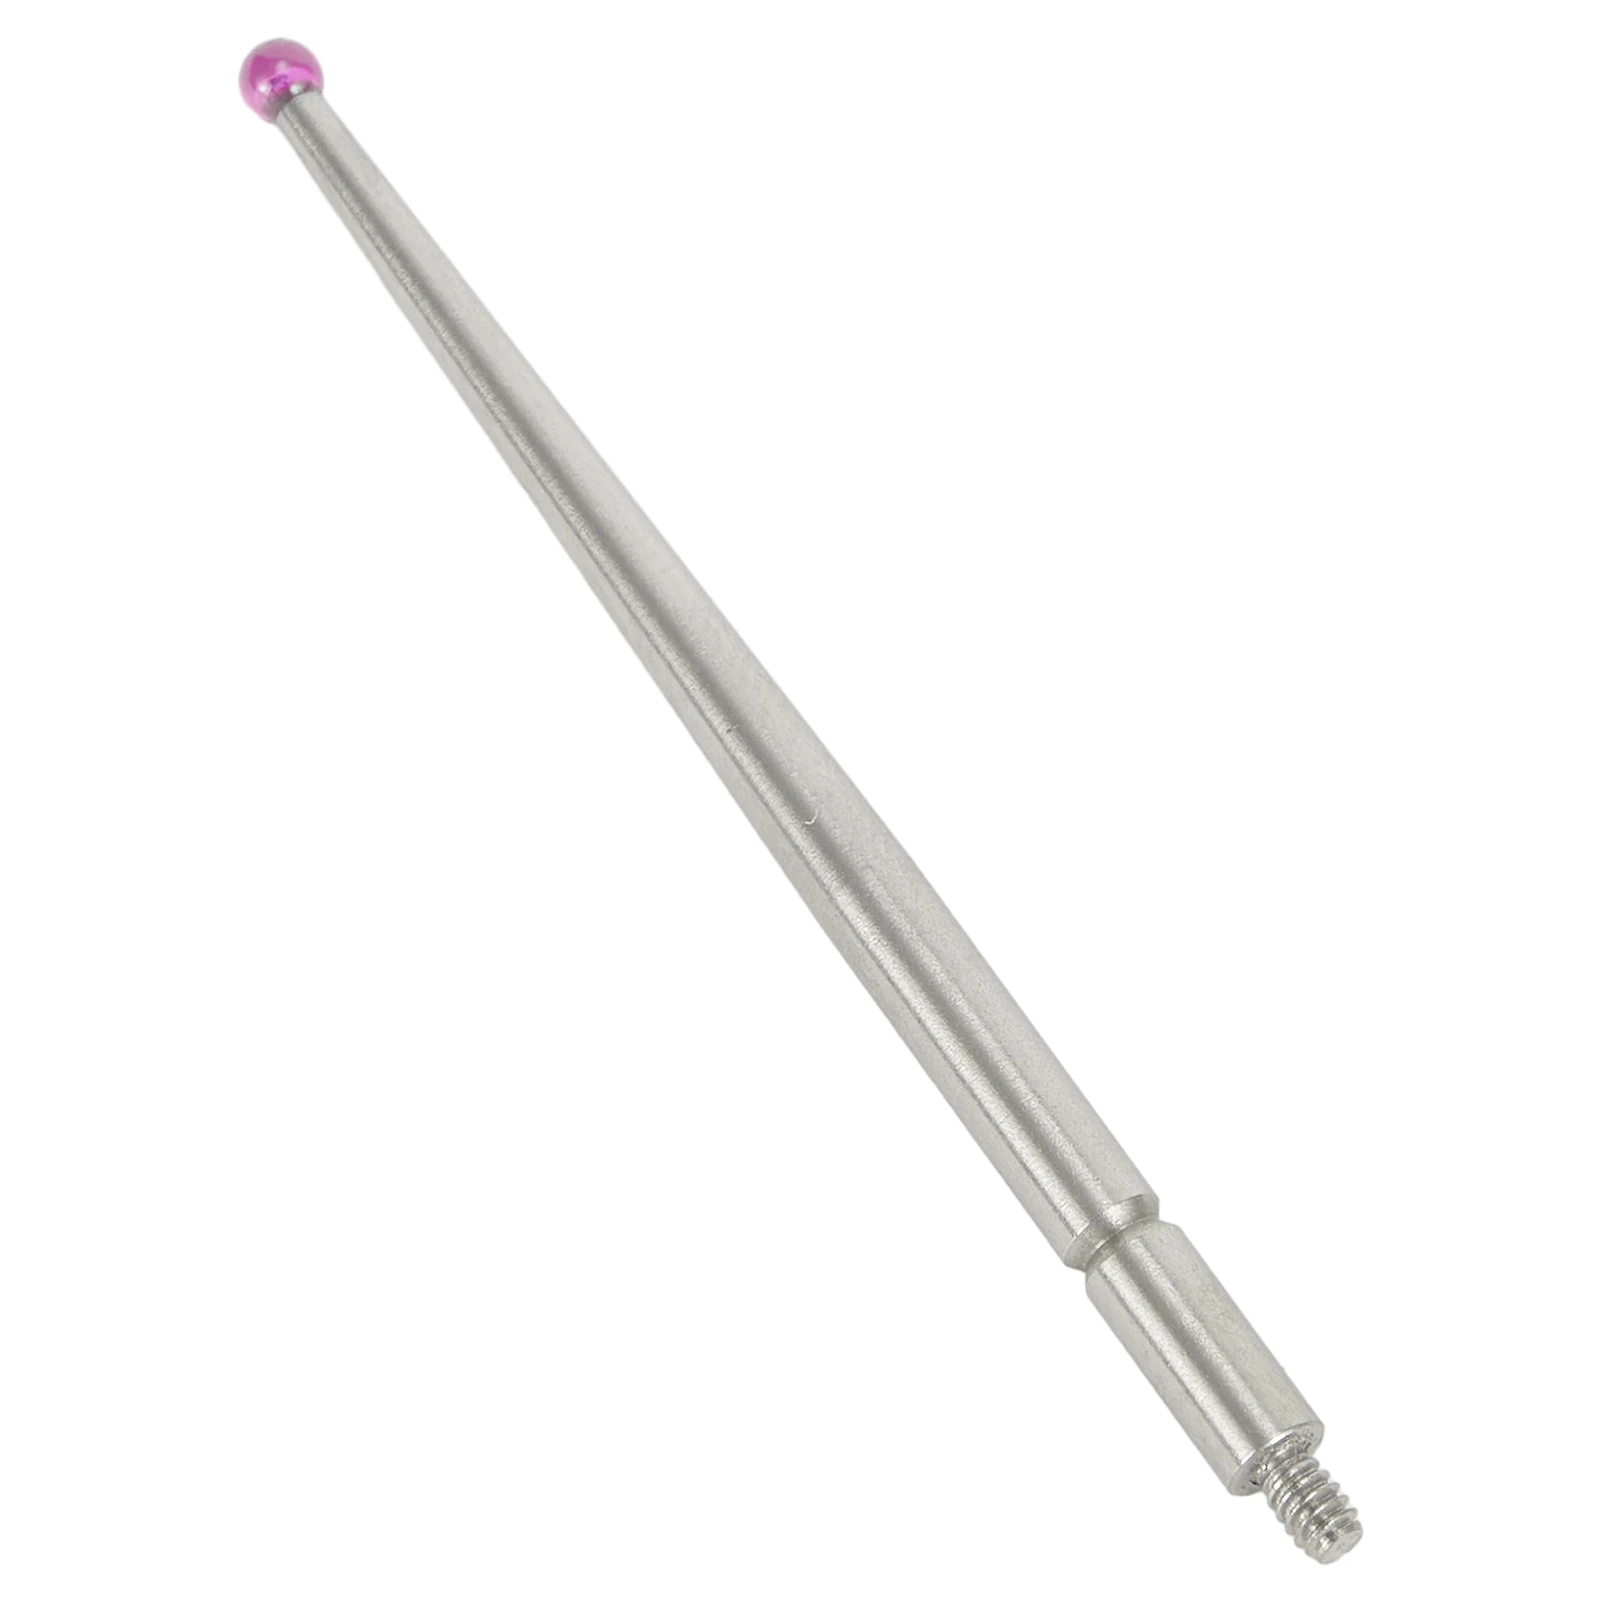 Contact Points Probe For Dial Test Indicator M1.6 Threaded Shank 2mm Diameter Ru By Ball For 513-115 For 513-215F improve your measurement precision with for 21cza211 dial test indicator contact points 2mm ru by ball tip m1 6